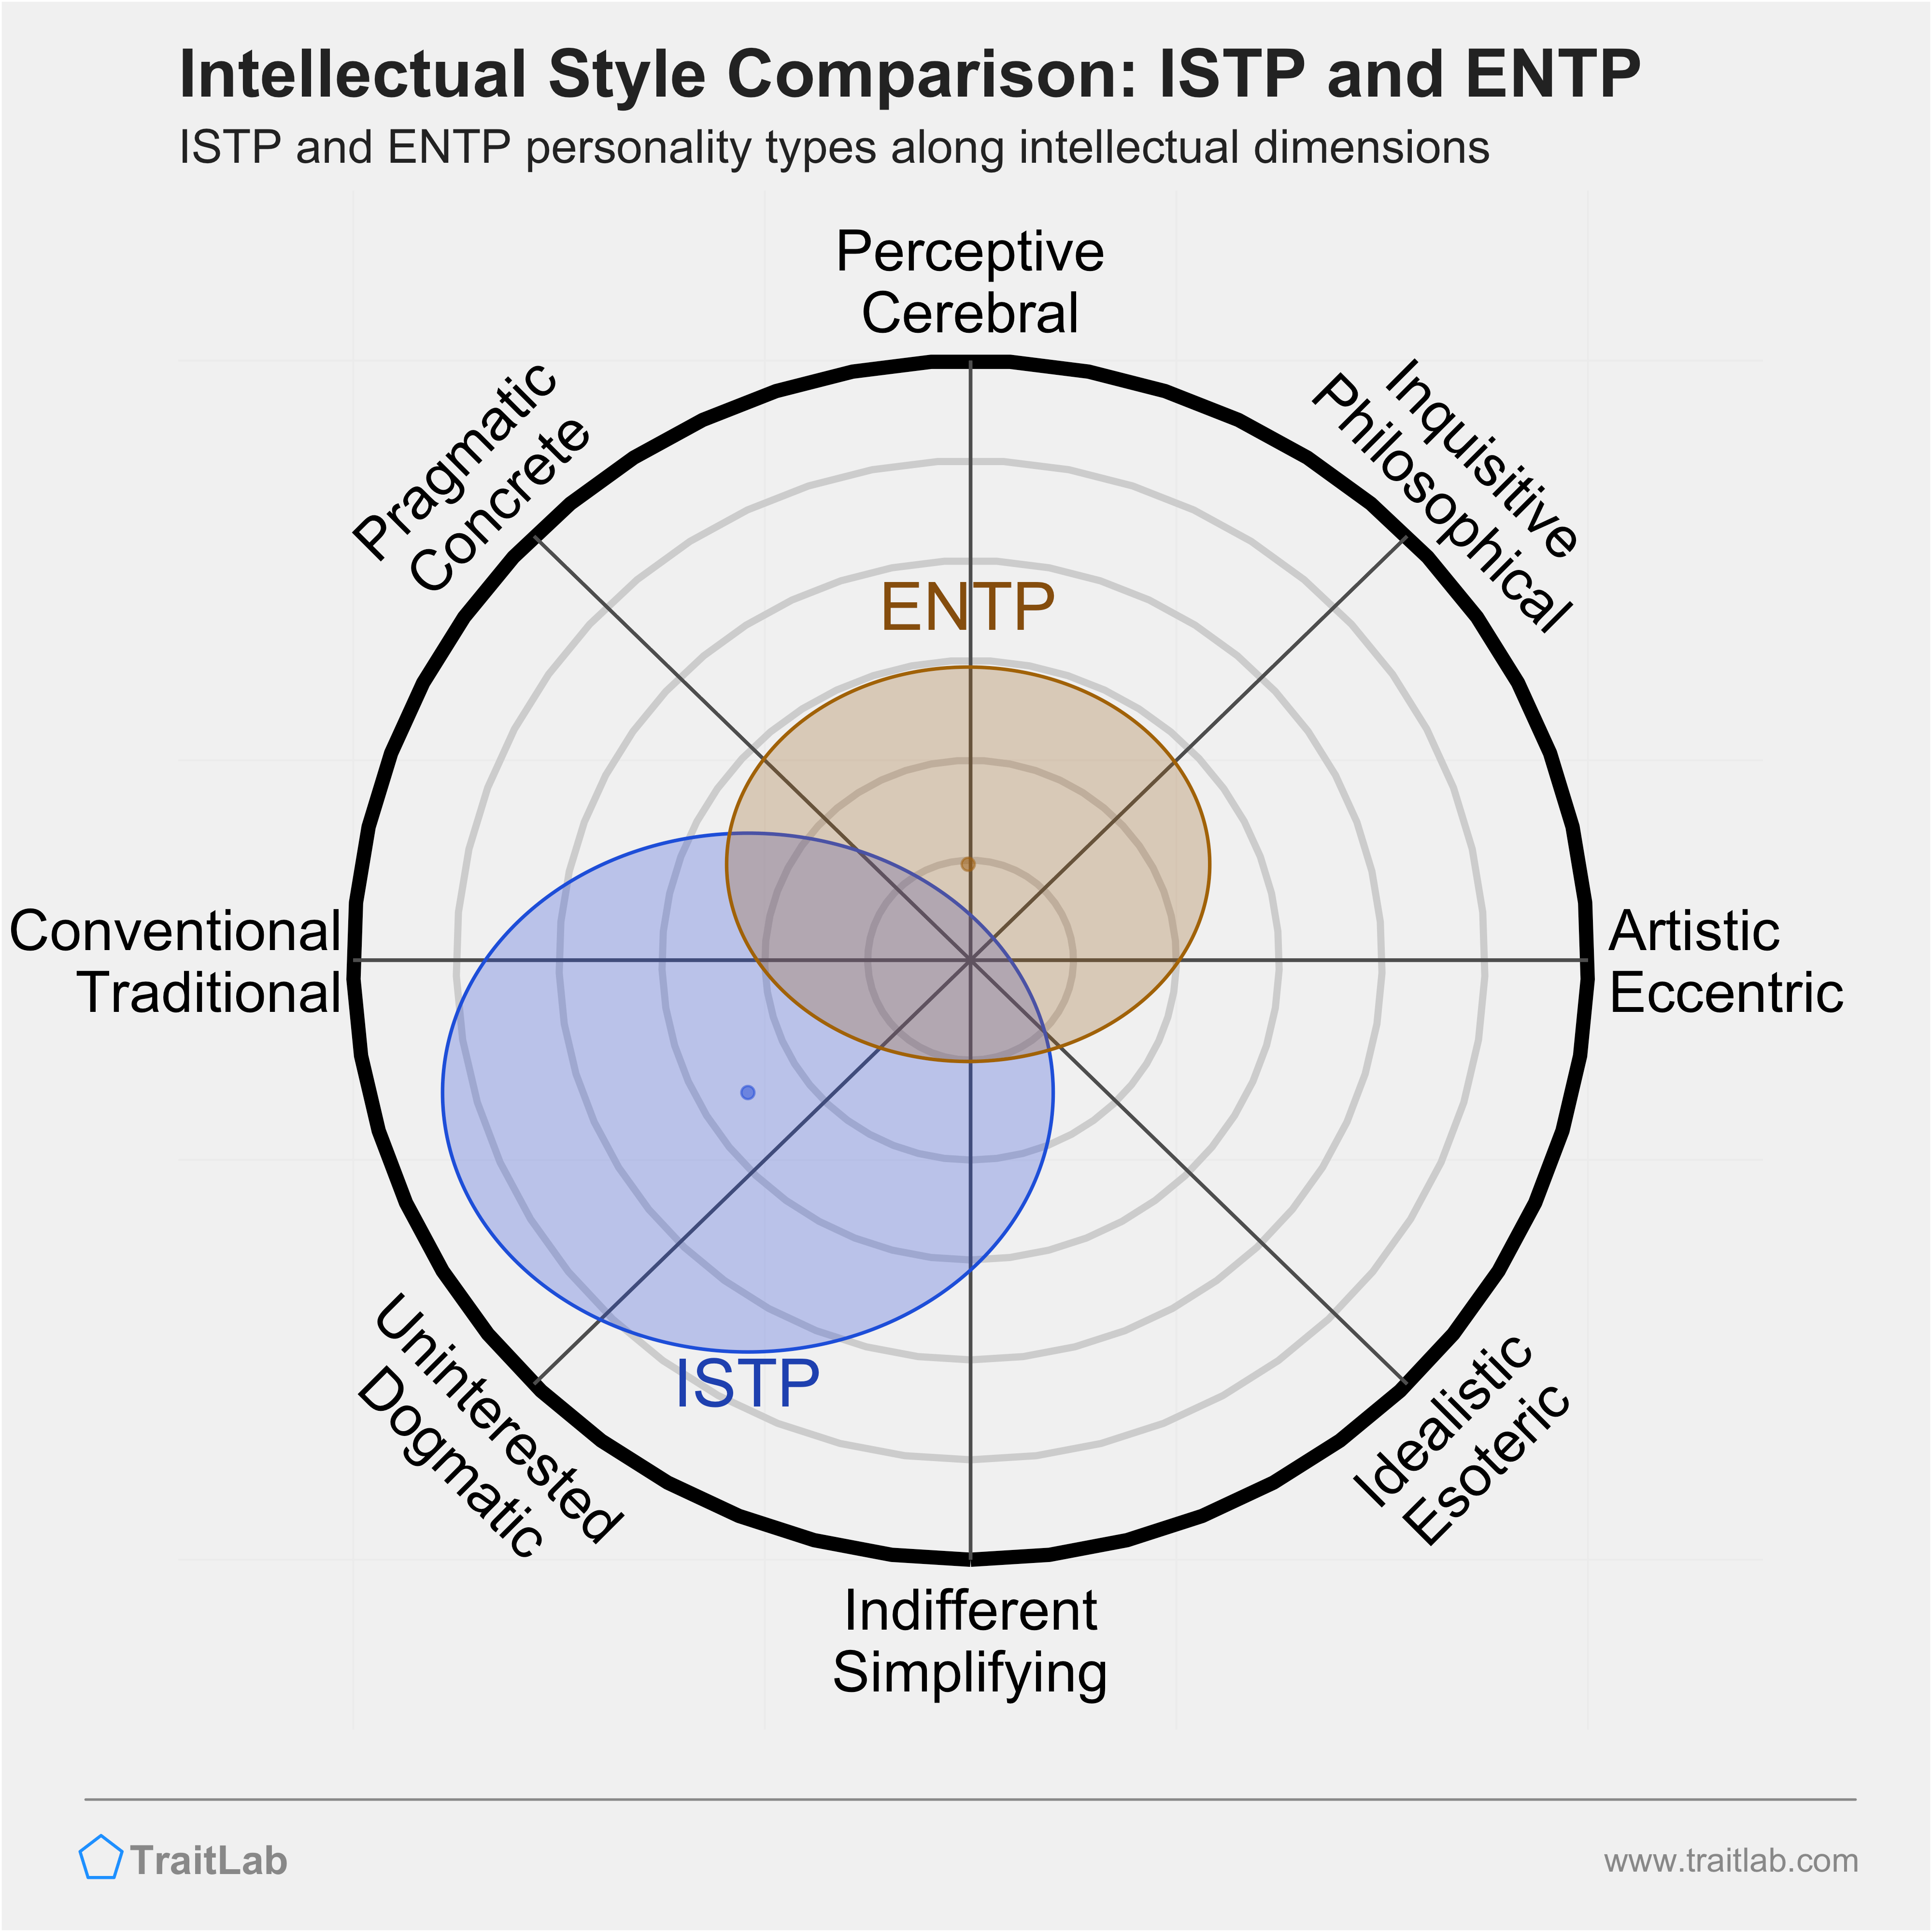 ISTP and ENTP comparison across intellectual dimensions